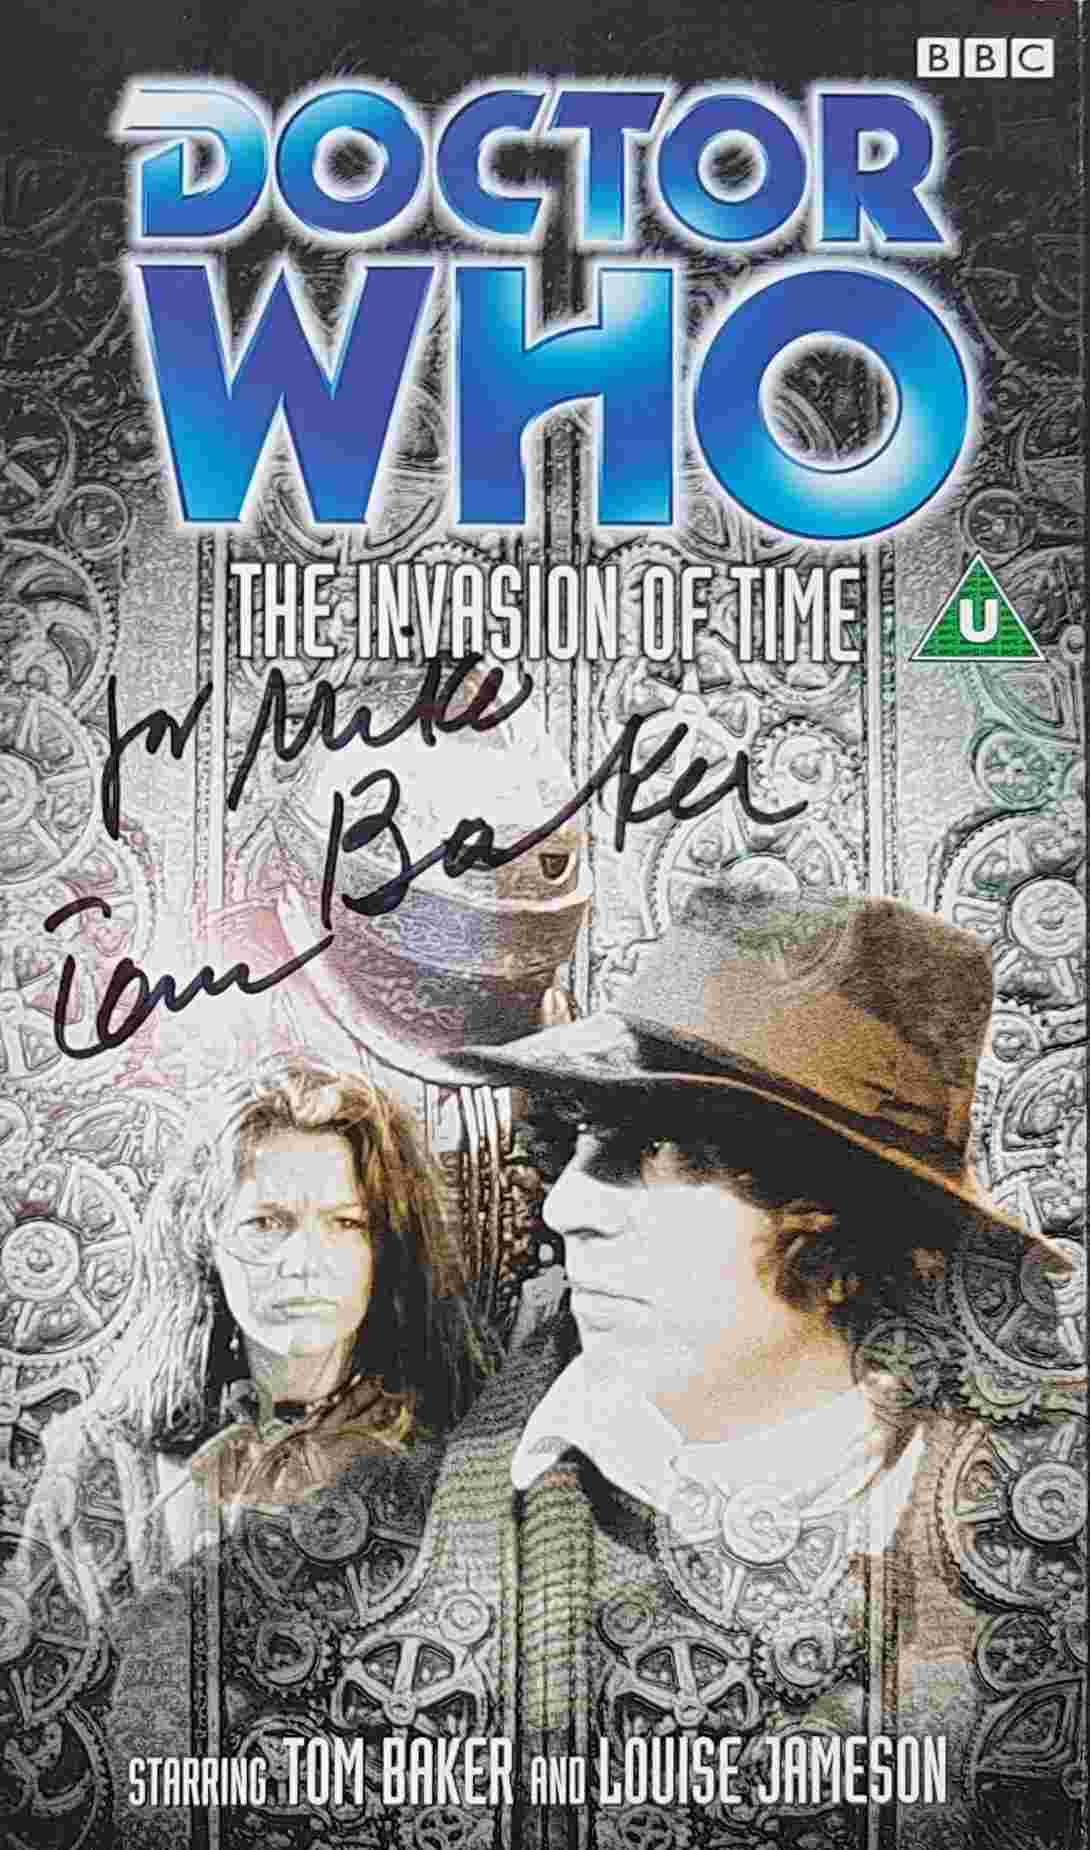 Picture of BBCV 6876 Doctor Who - The invasion of time by artist David Agnew from the BBC records and Tapes library